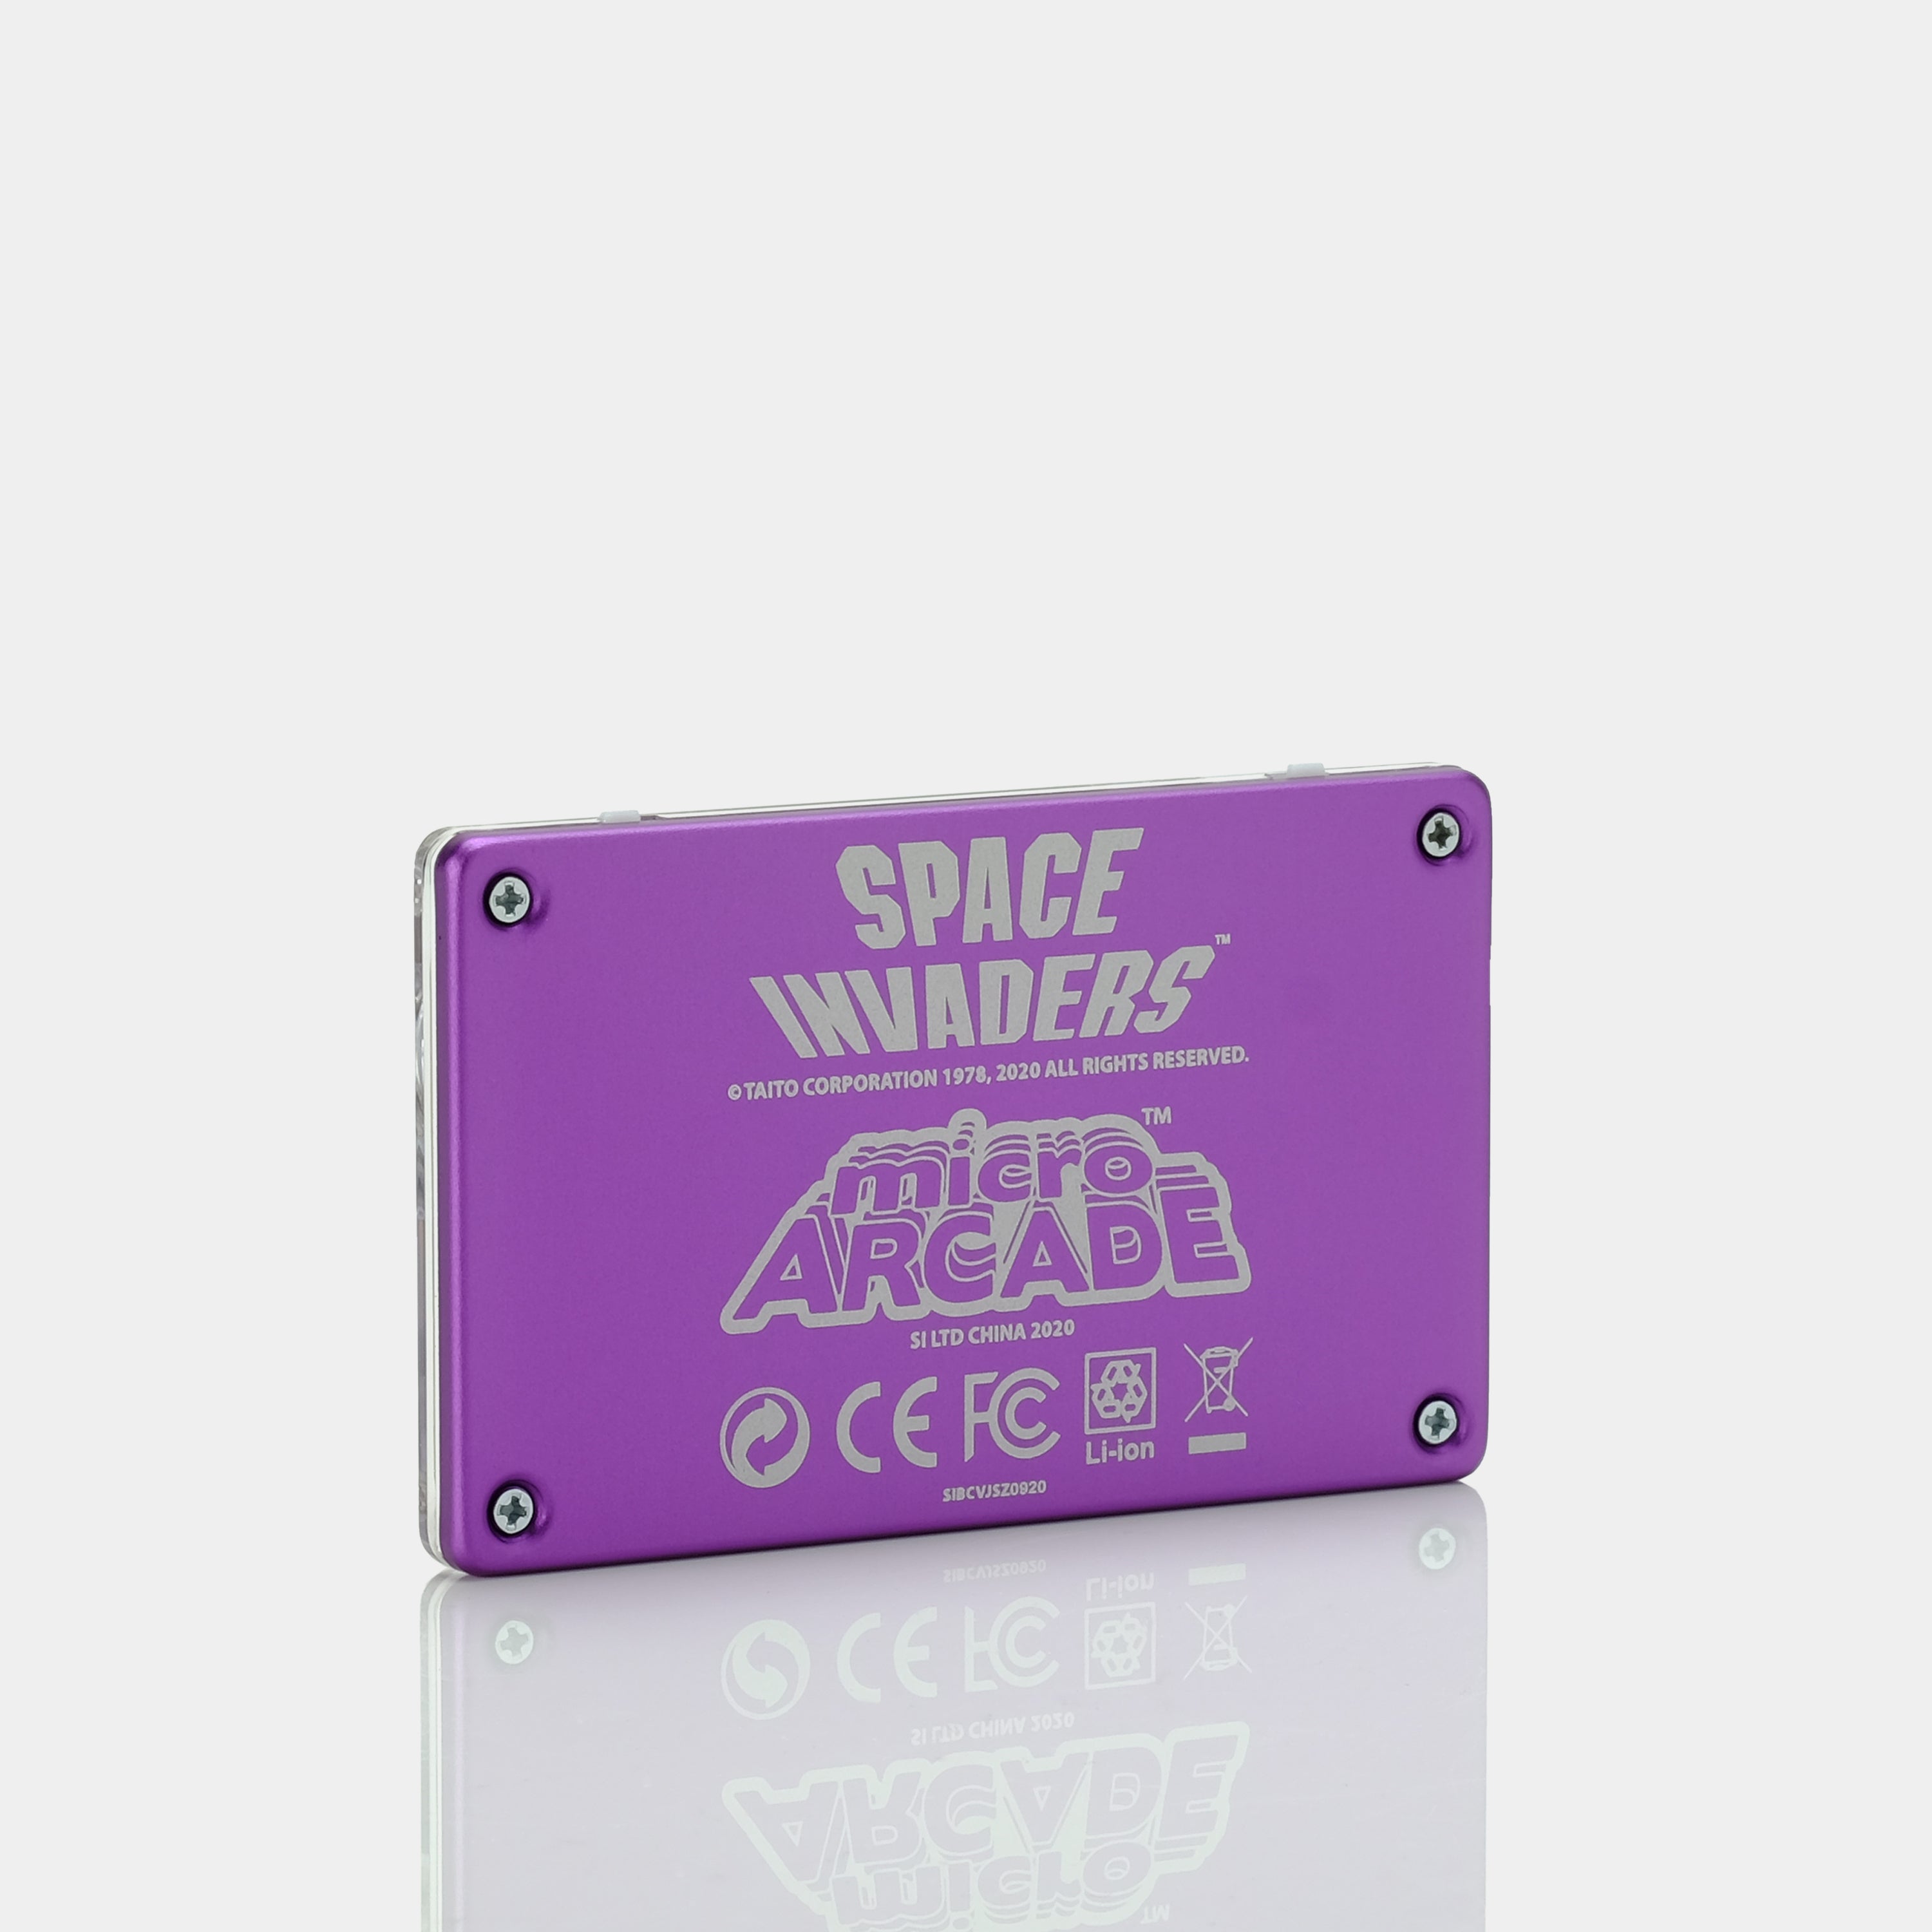 Micro Arcade Space Invaders Game